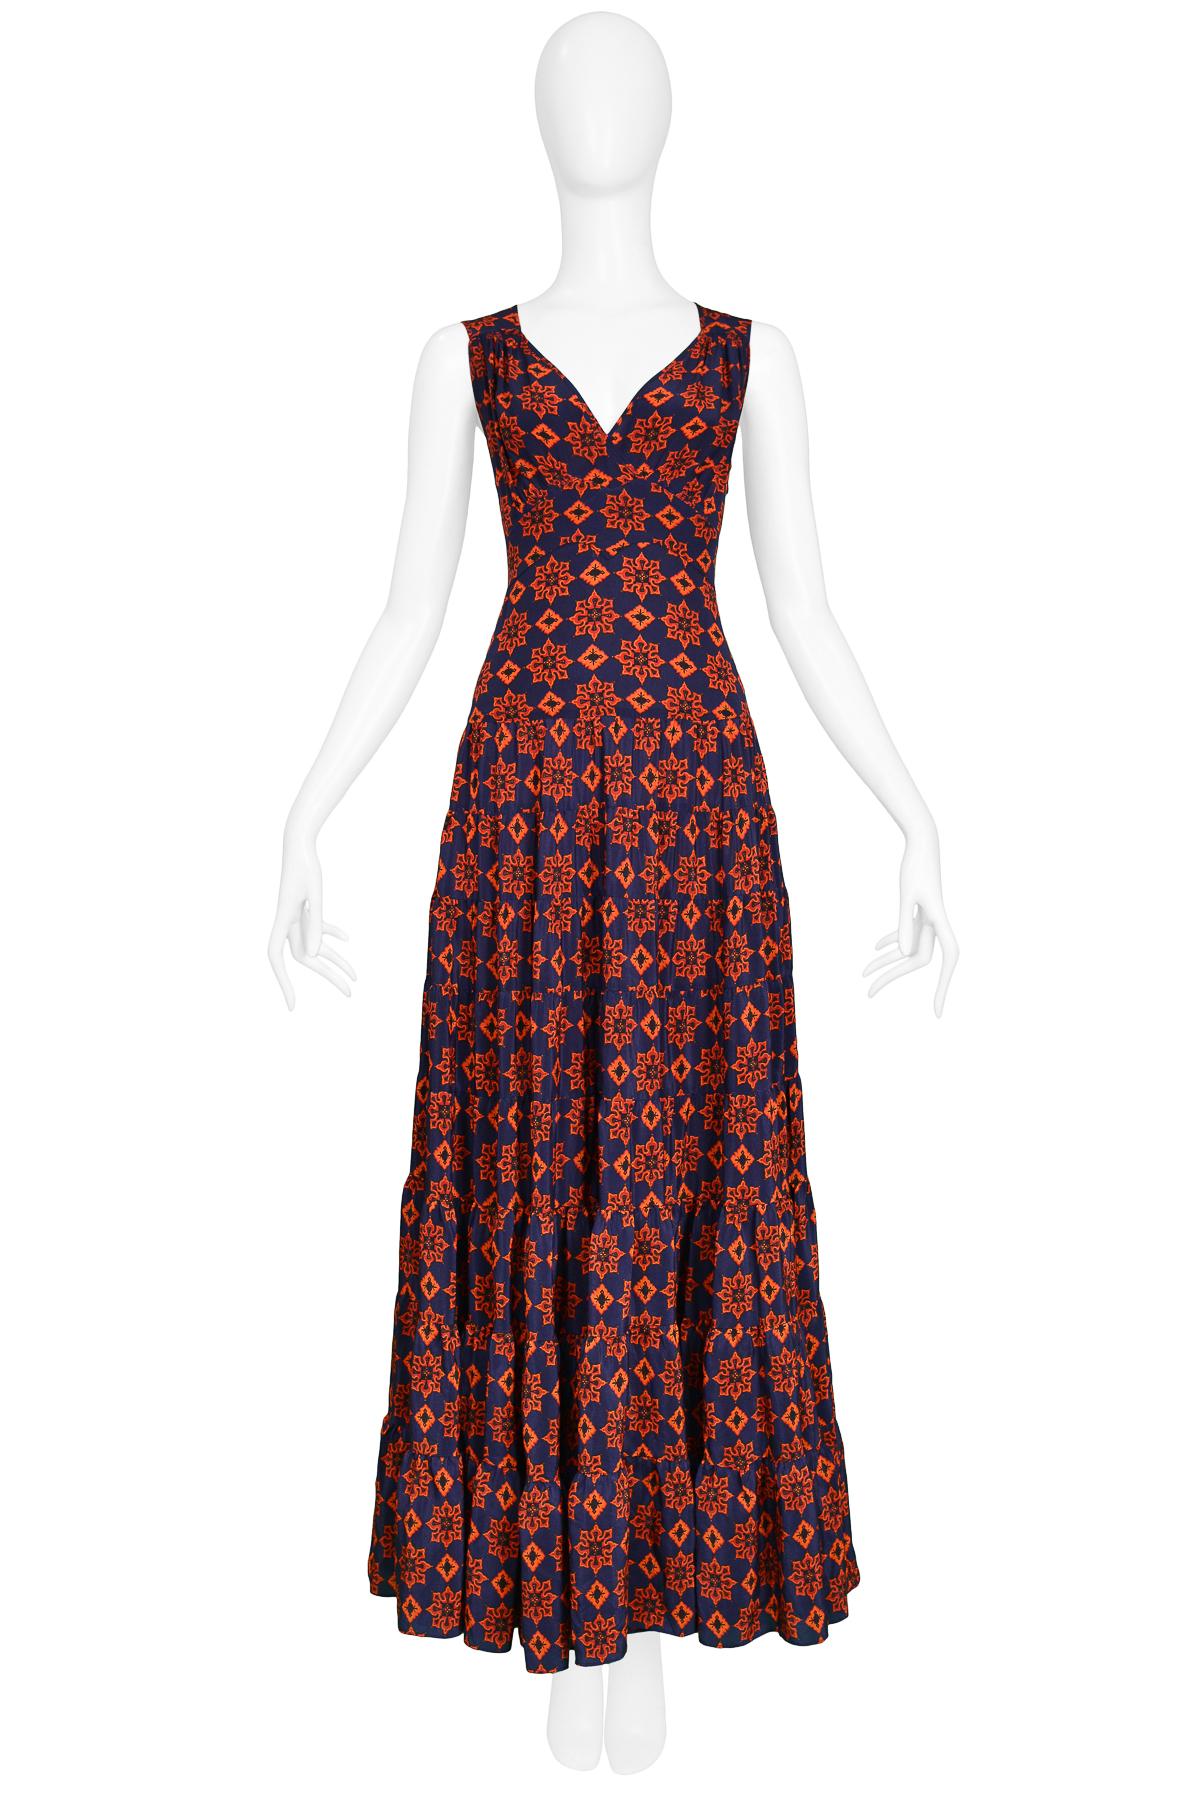 Vintage Nicolas Ghesquière for Balenciaga red and navy blue sleeveless silk maxi dress with geometric floral print, tiered skirt, and side zipper and tie. From the 2007 collection.

Excellent Vintage Condition.

Size 34